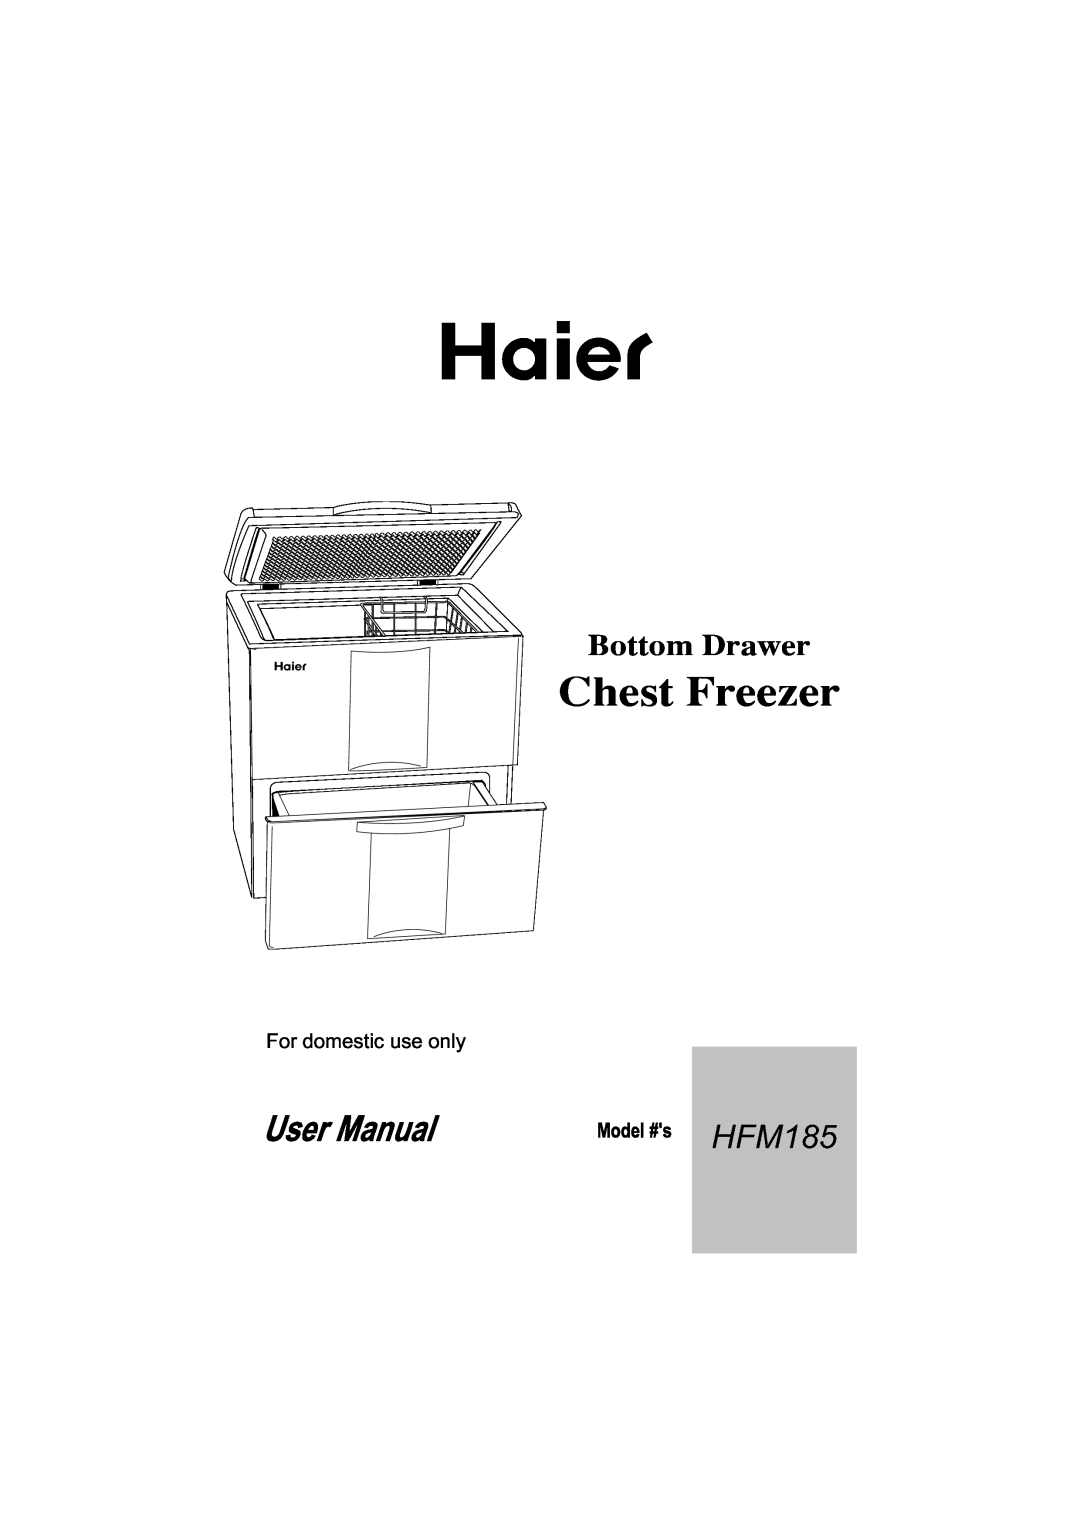 Haier HFM185 manual Chest Freezer, Bottom Drawer, For domestic use only 